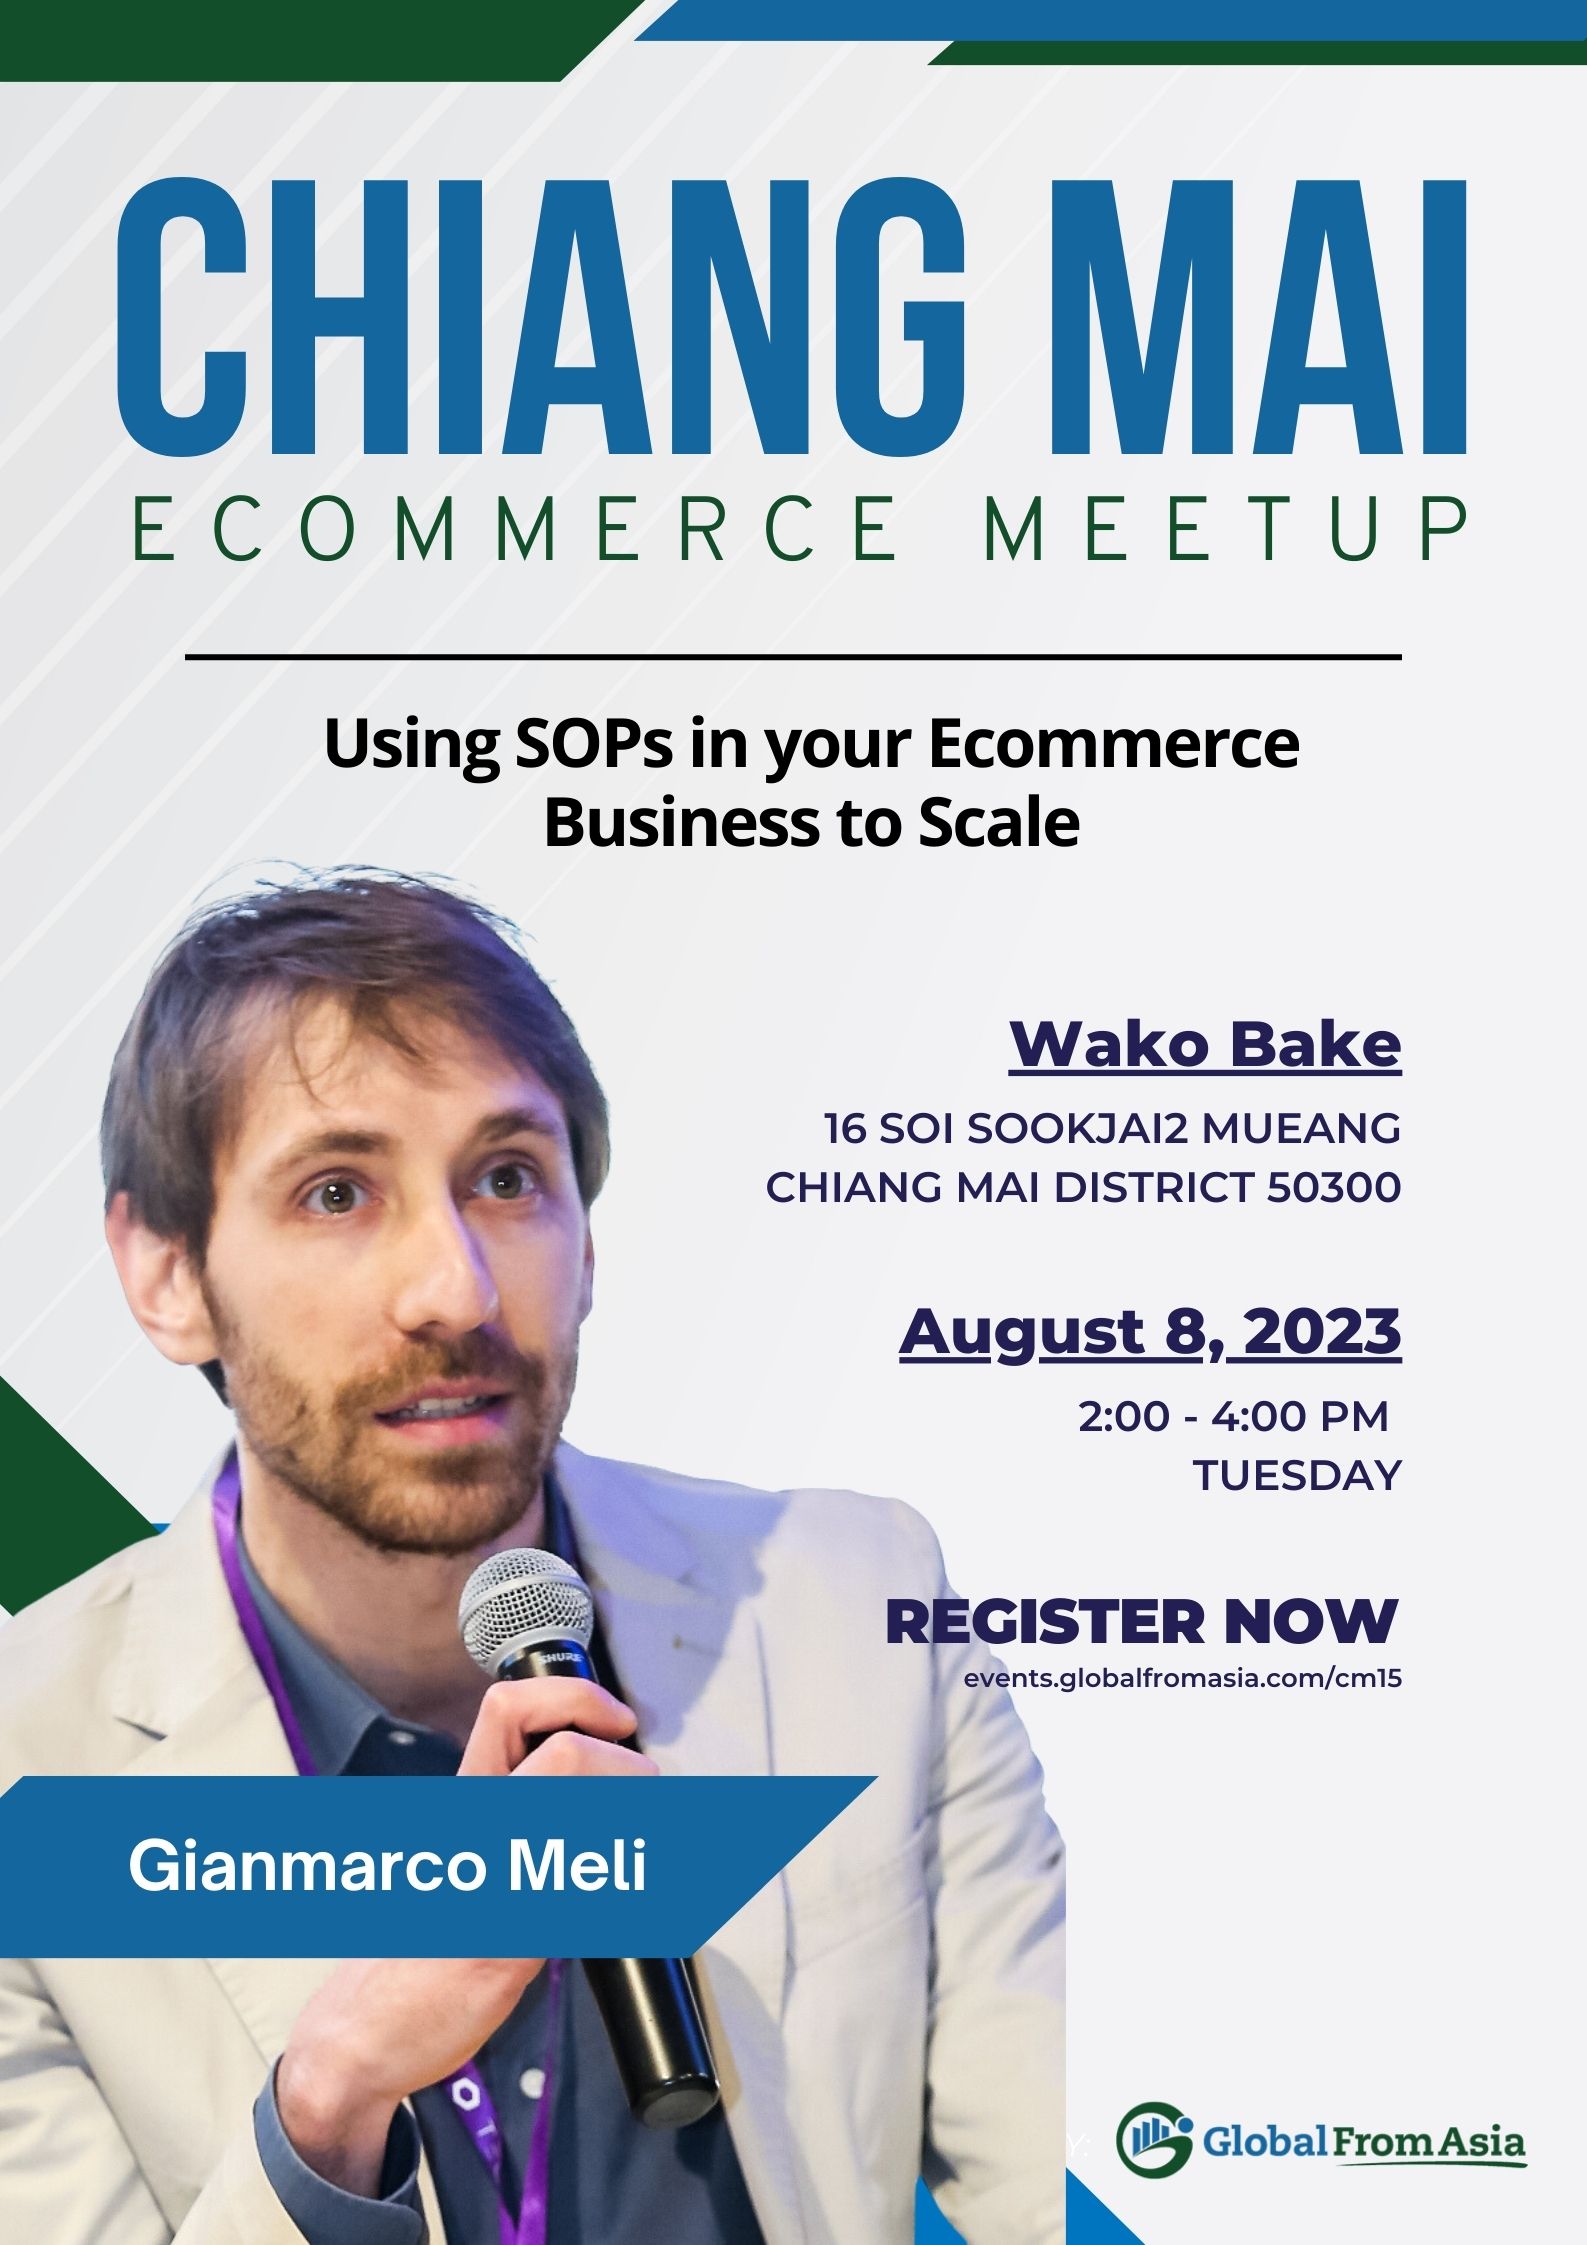 Chiang Mai Meetup: Using SOPs in your Ecommerce Business to Scale